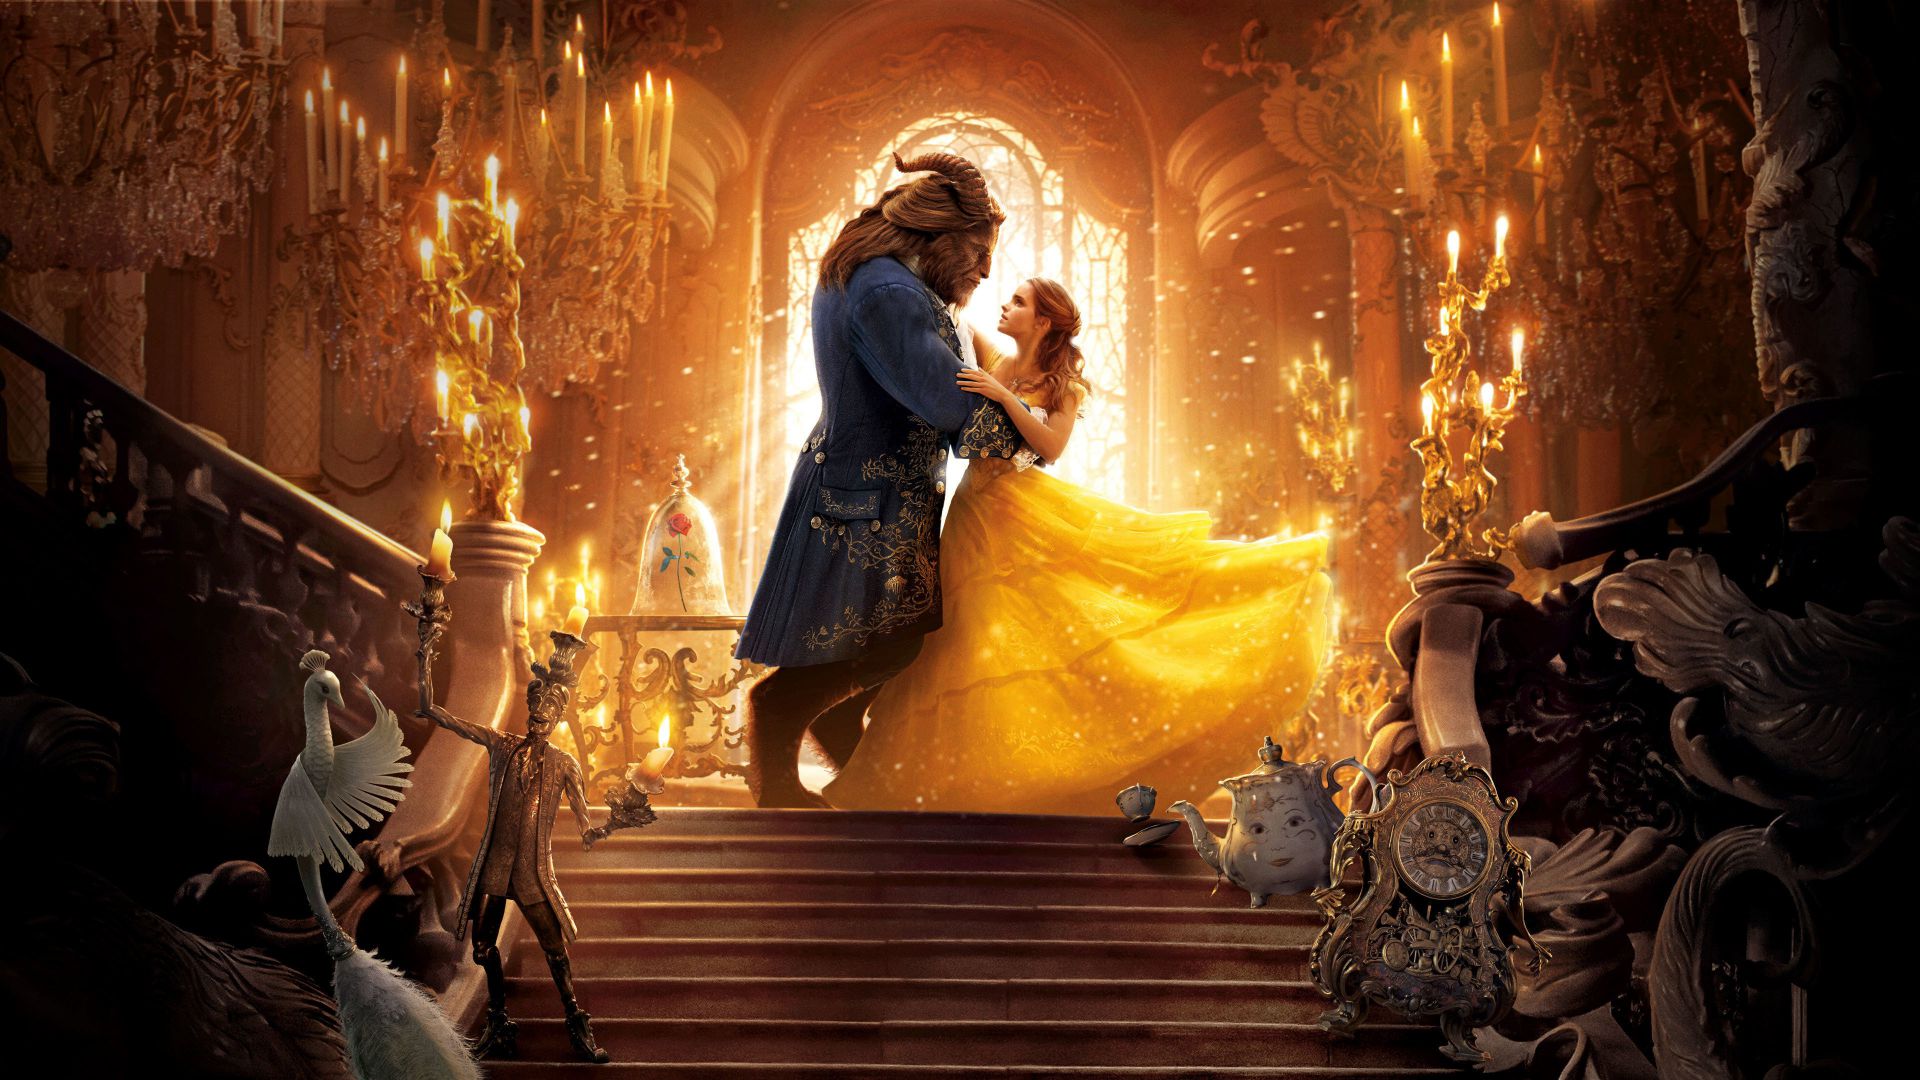 union-films-review-beauty-and-the-beast